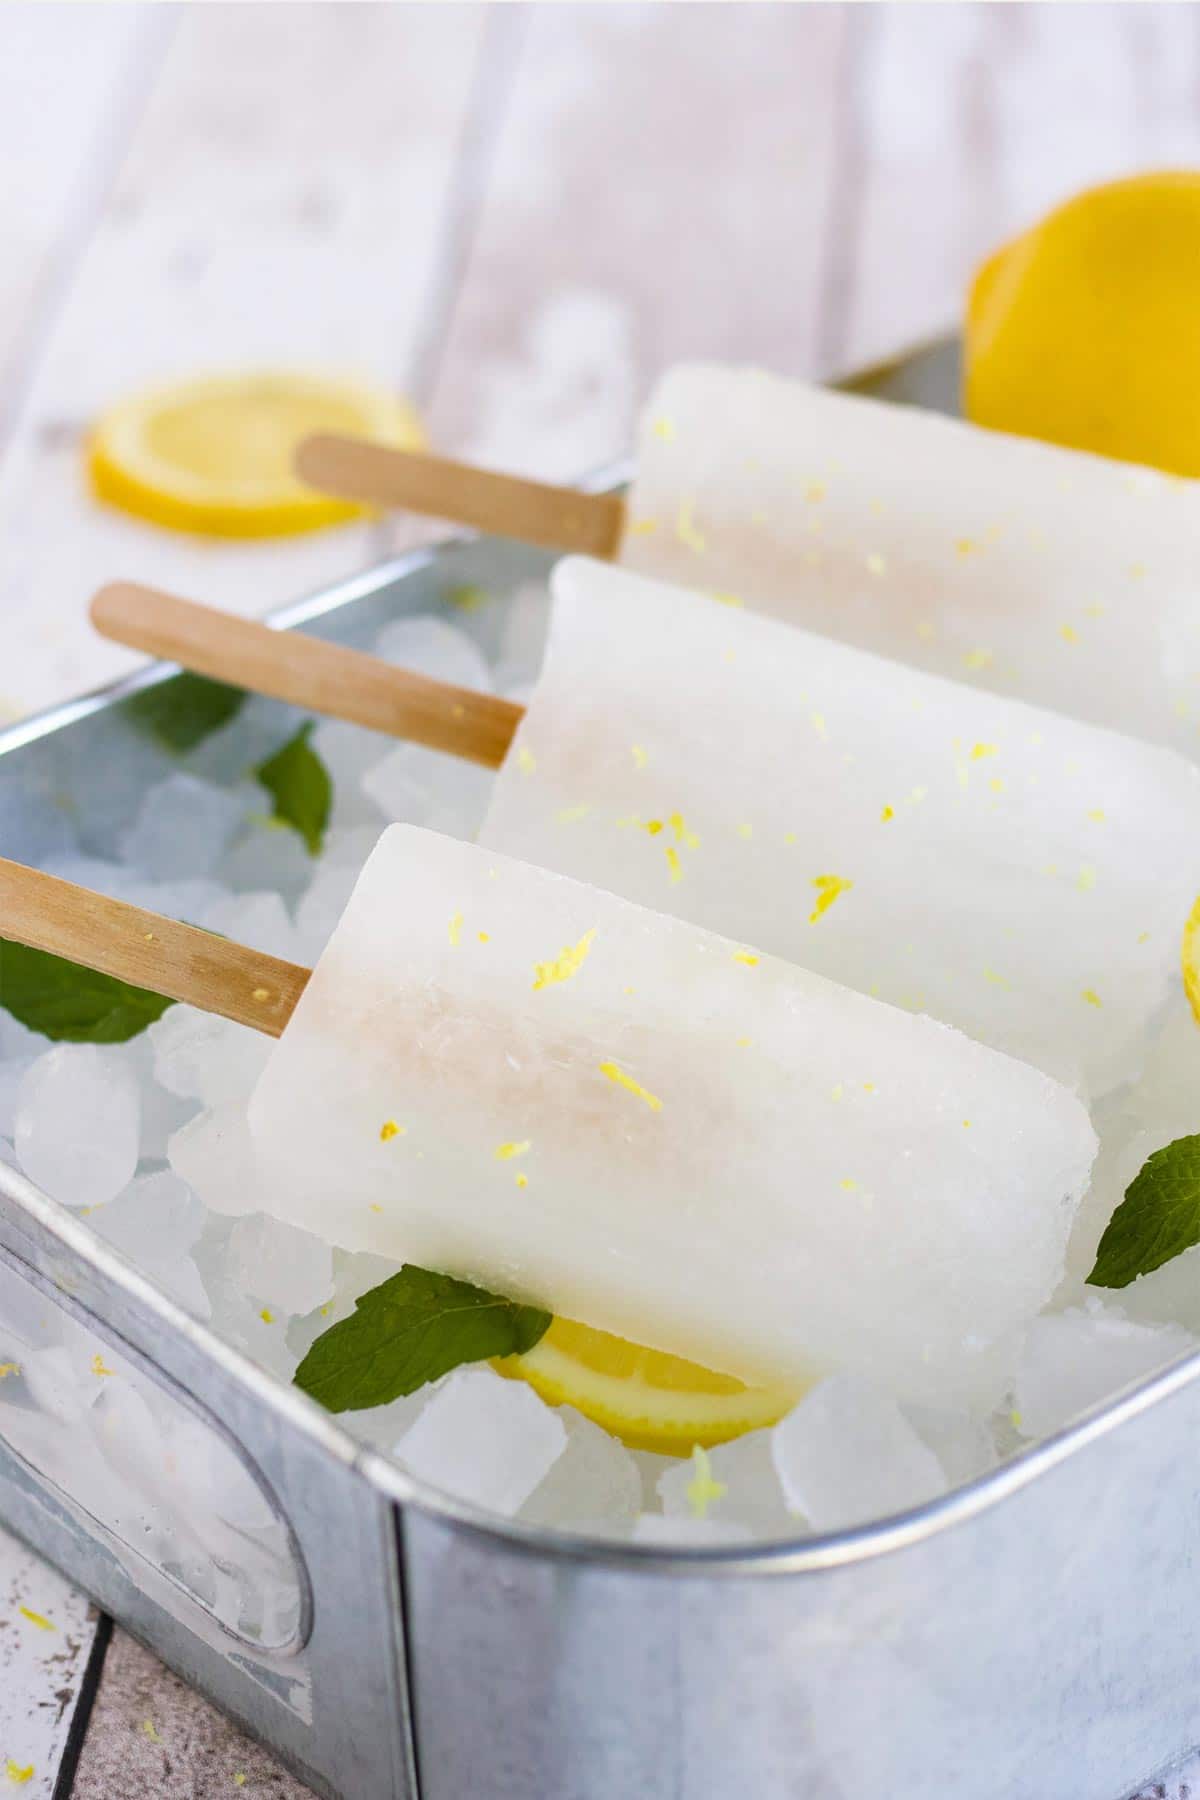 3 lemonade popsicles on a metal tray of ice.